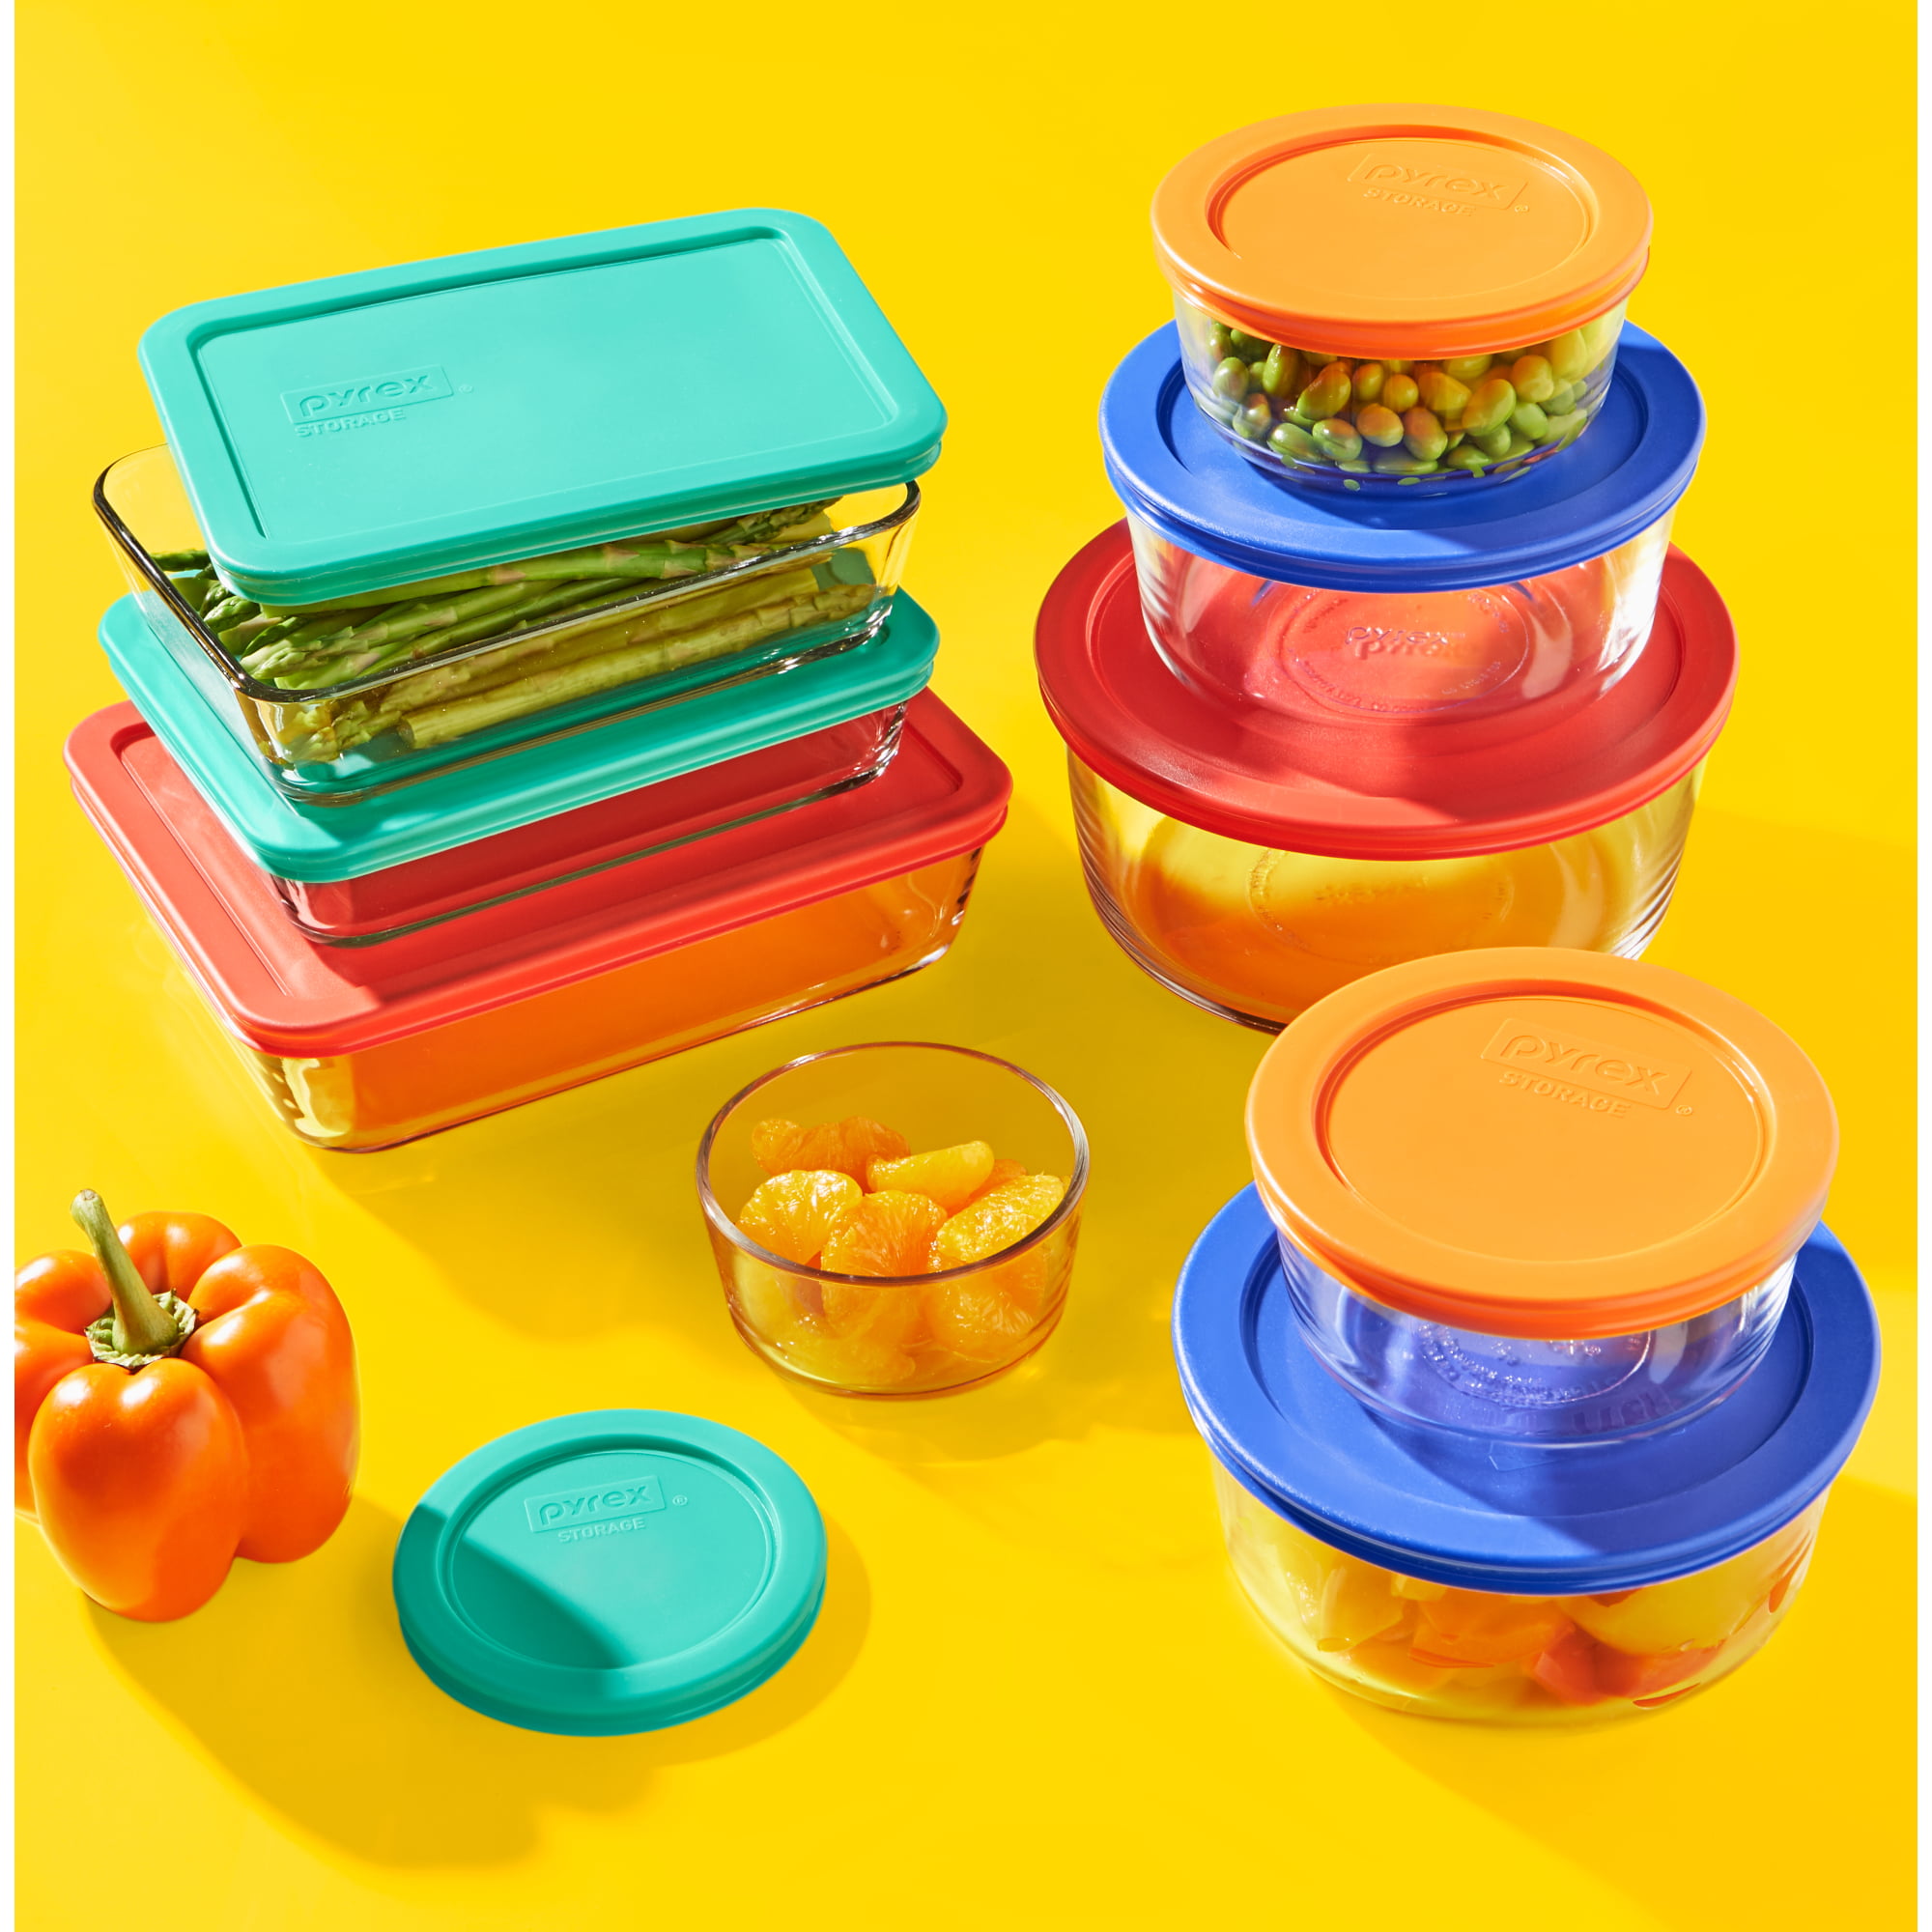 Pyrex Meal Prep Simply Store Glass Rectangular and Round Food Container Set  (18-Piece, BPA-free), Multicolor